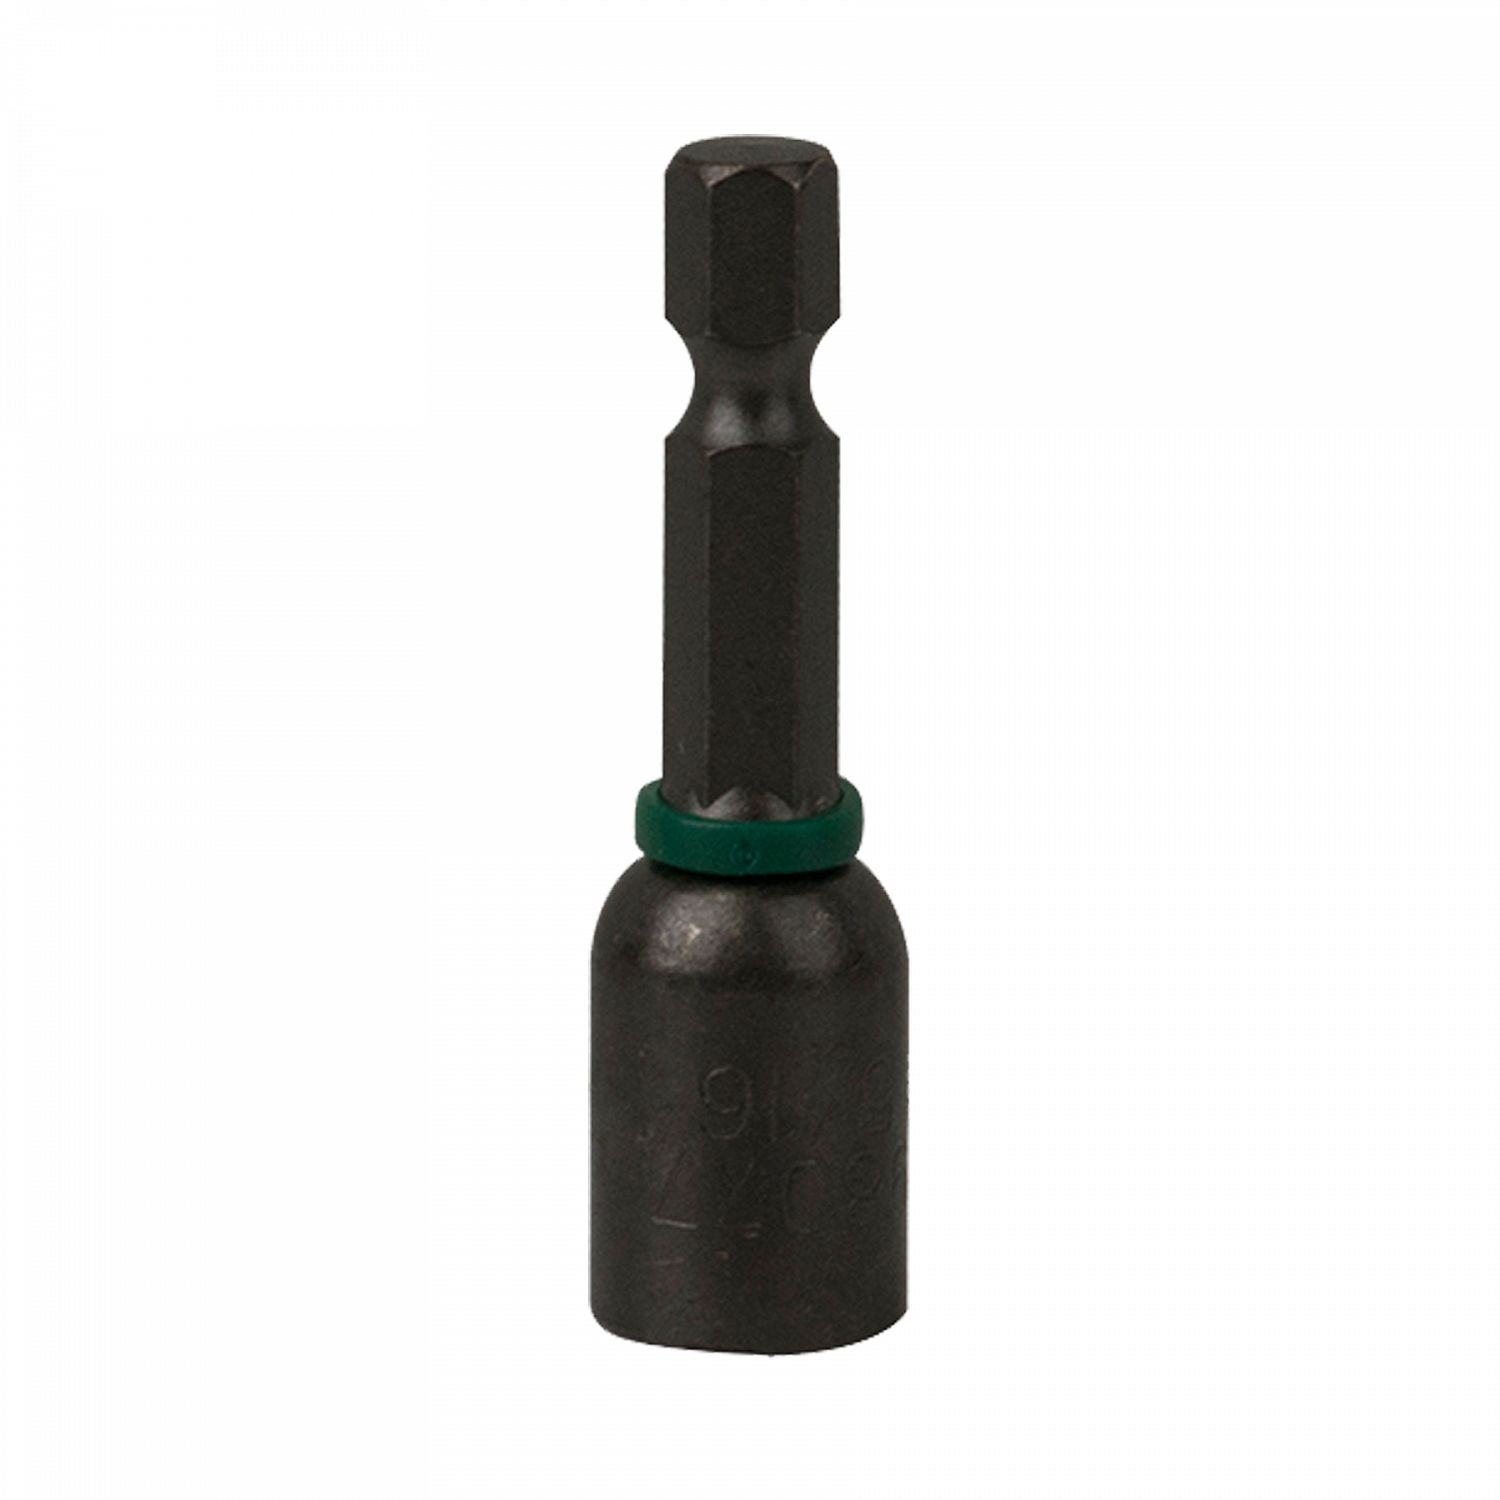 2" - STAY SHARP IMPACT INDUSTRIAL 5/16" NUTSETTER - Kilrich Building Centres